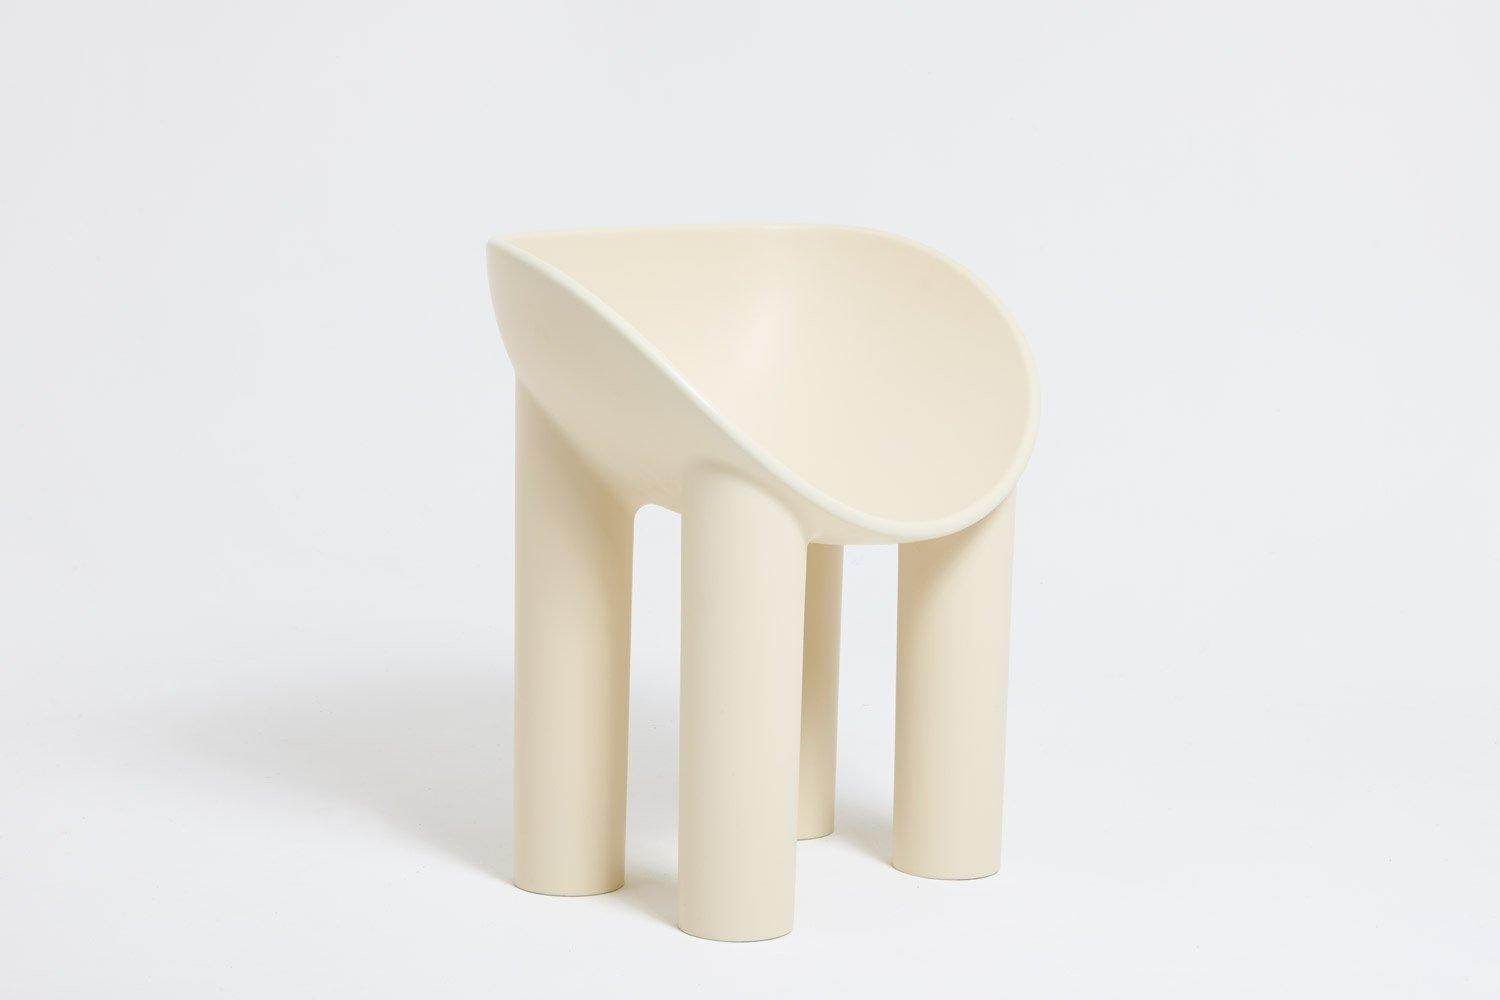 Roly-Poly Dining Chair Raw
Manufactured by Faye Toogood
London, 2018
Fiberglass

Measurements
68cm wide x 50cm deep x 75cm hight
26.77in wide x 19.68in deep x 29.52in hight

Colors

– Cream
– Charcoal
– Chalk

Concept
Her furniture and objects